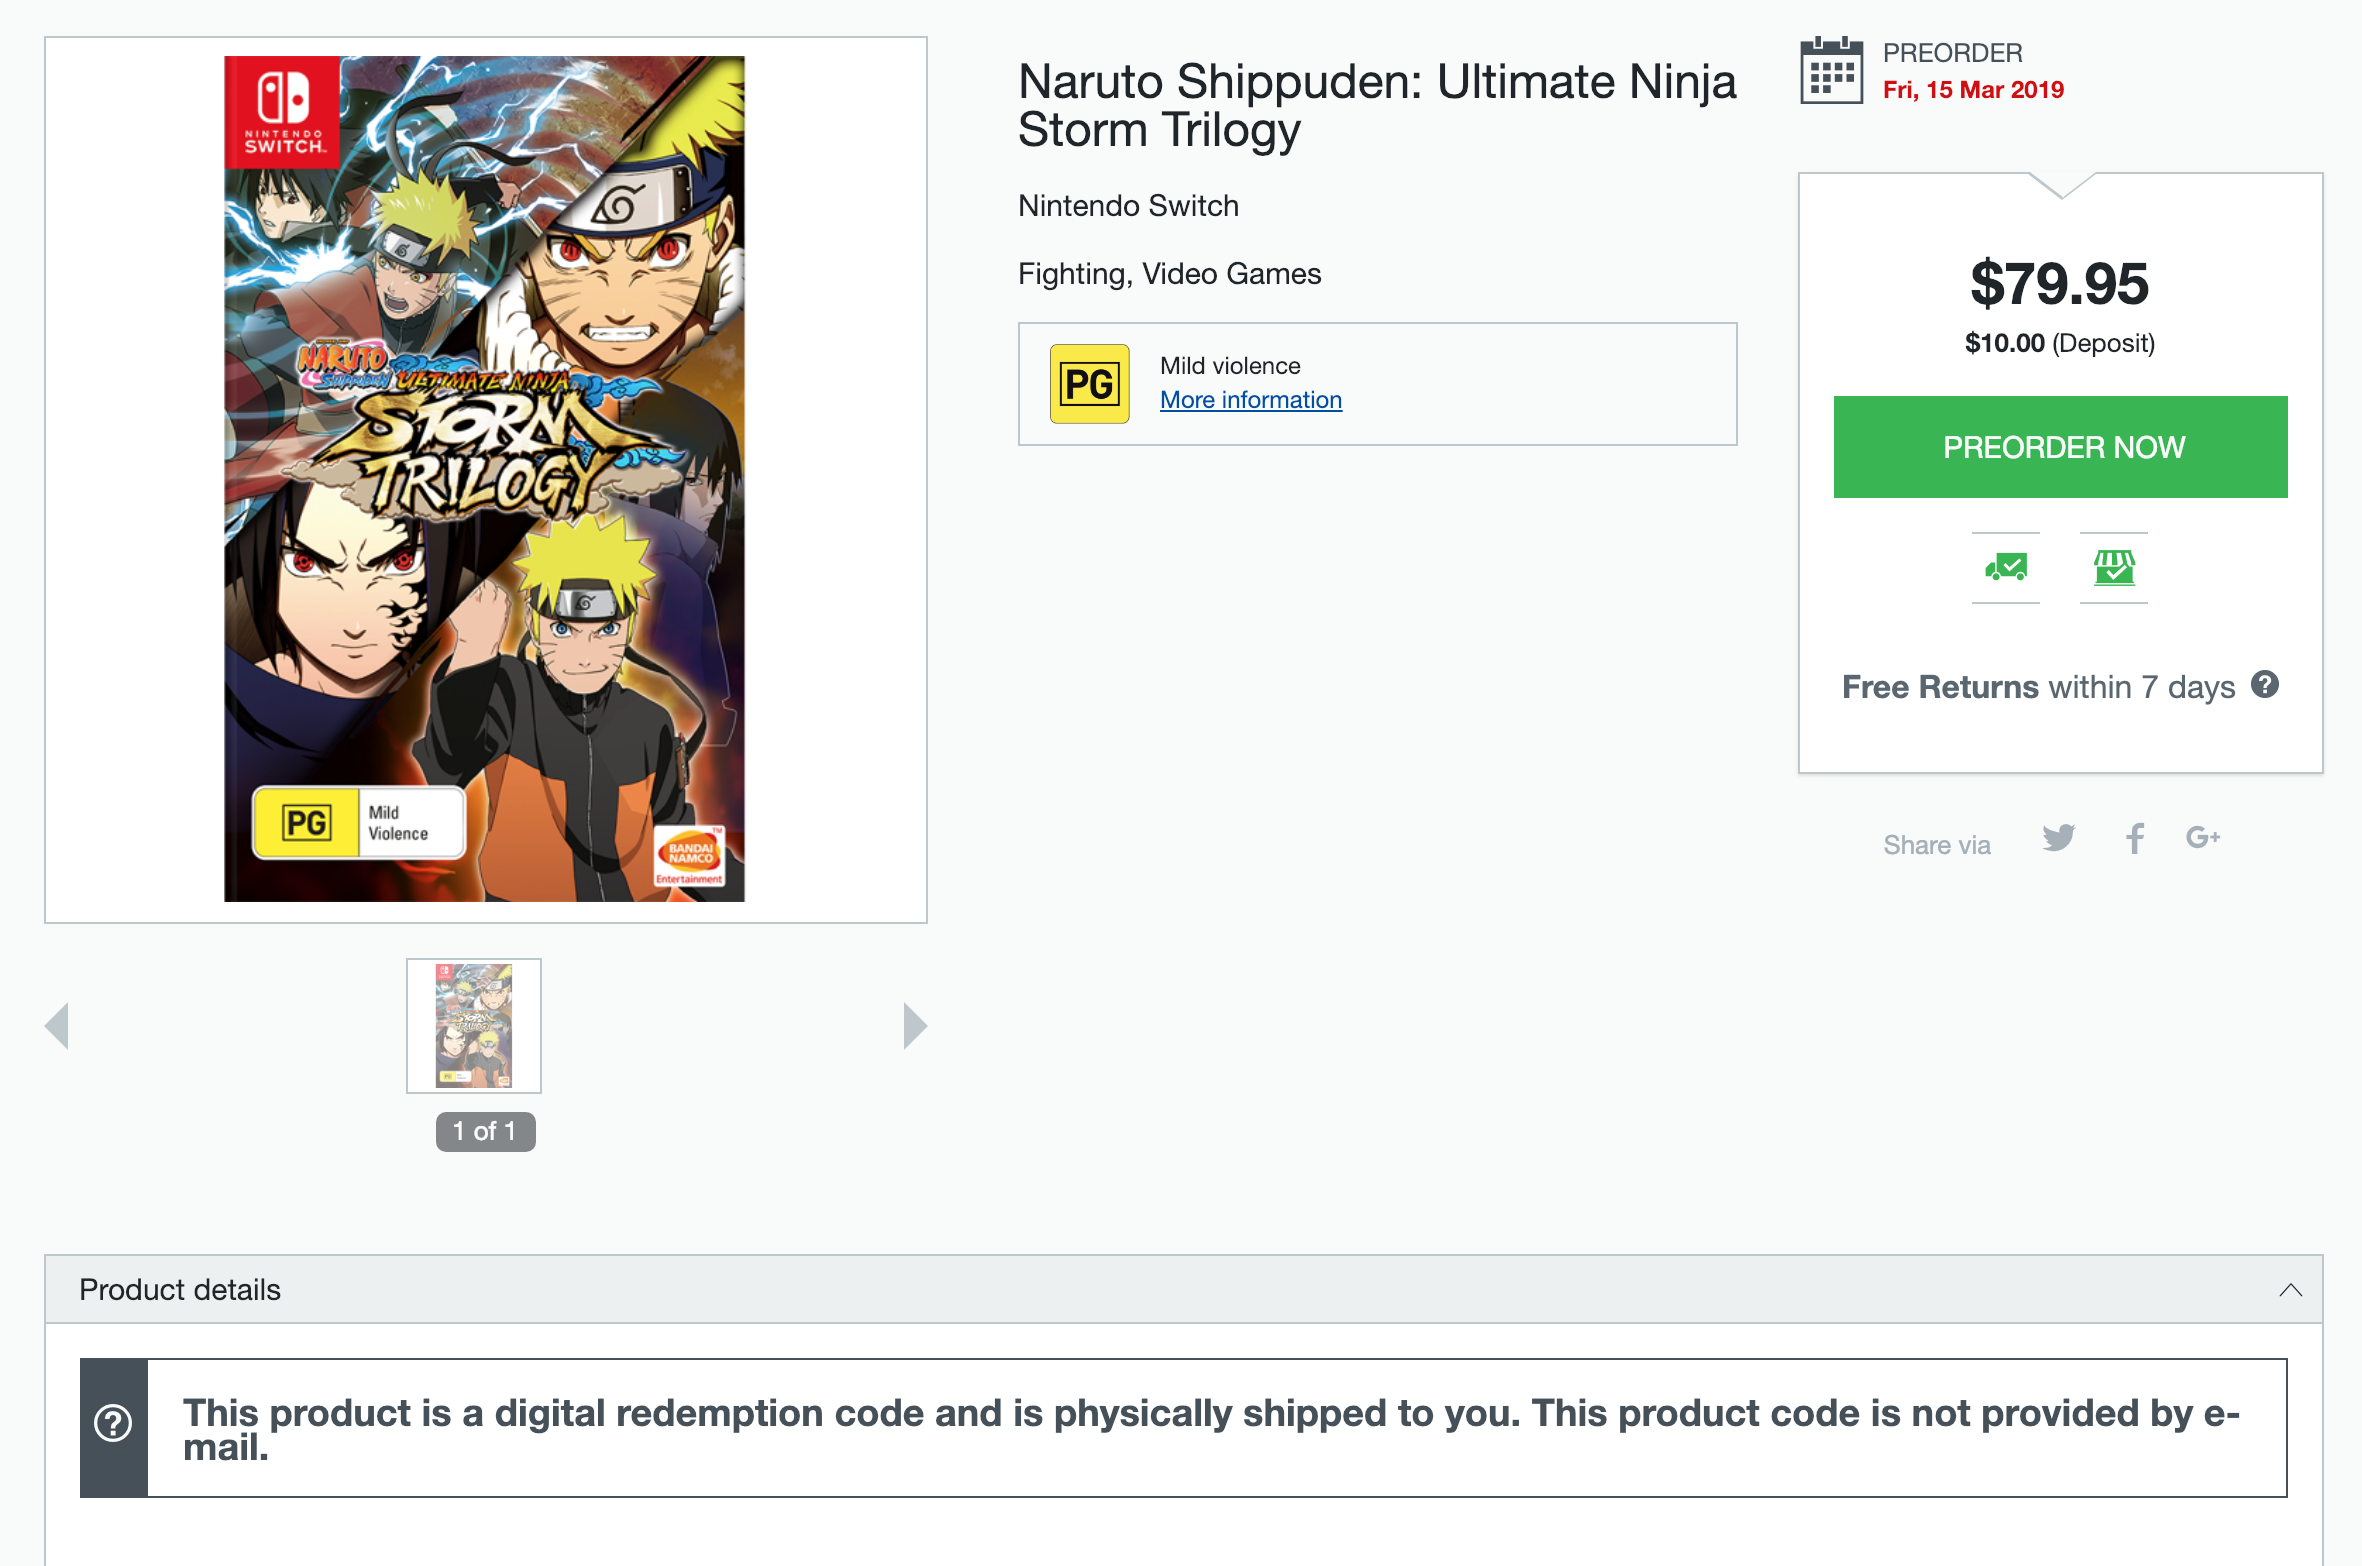 Naruto Shippuden: Require Will NintendoSoup Australia – Codes In Trilogy Storm Download Physical Ultimate Three Ninja